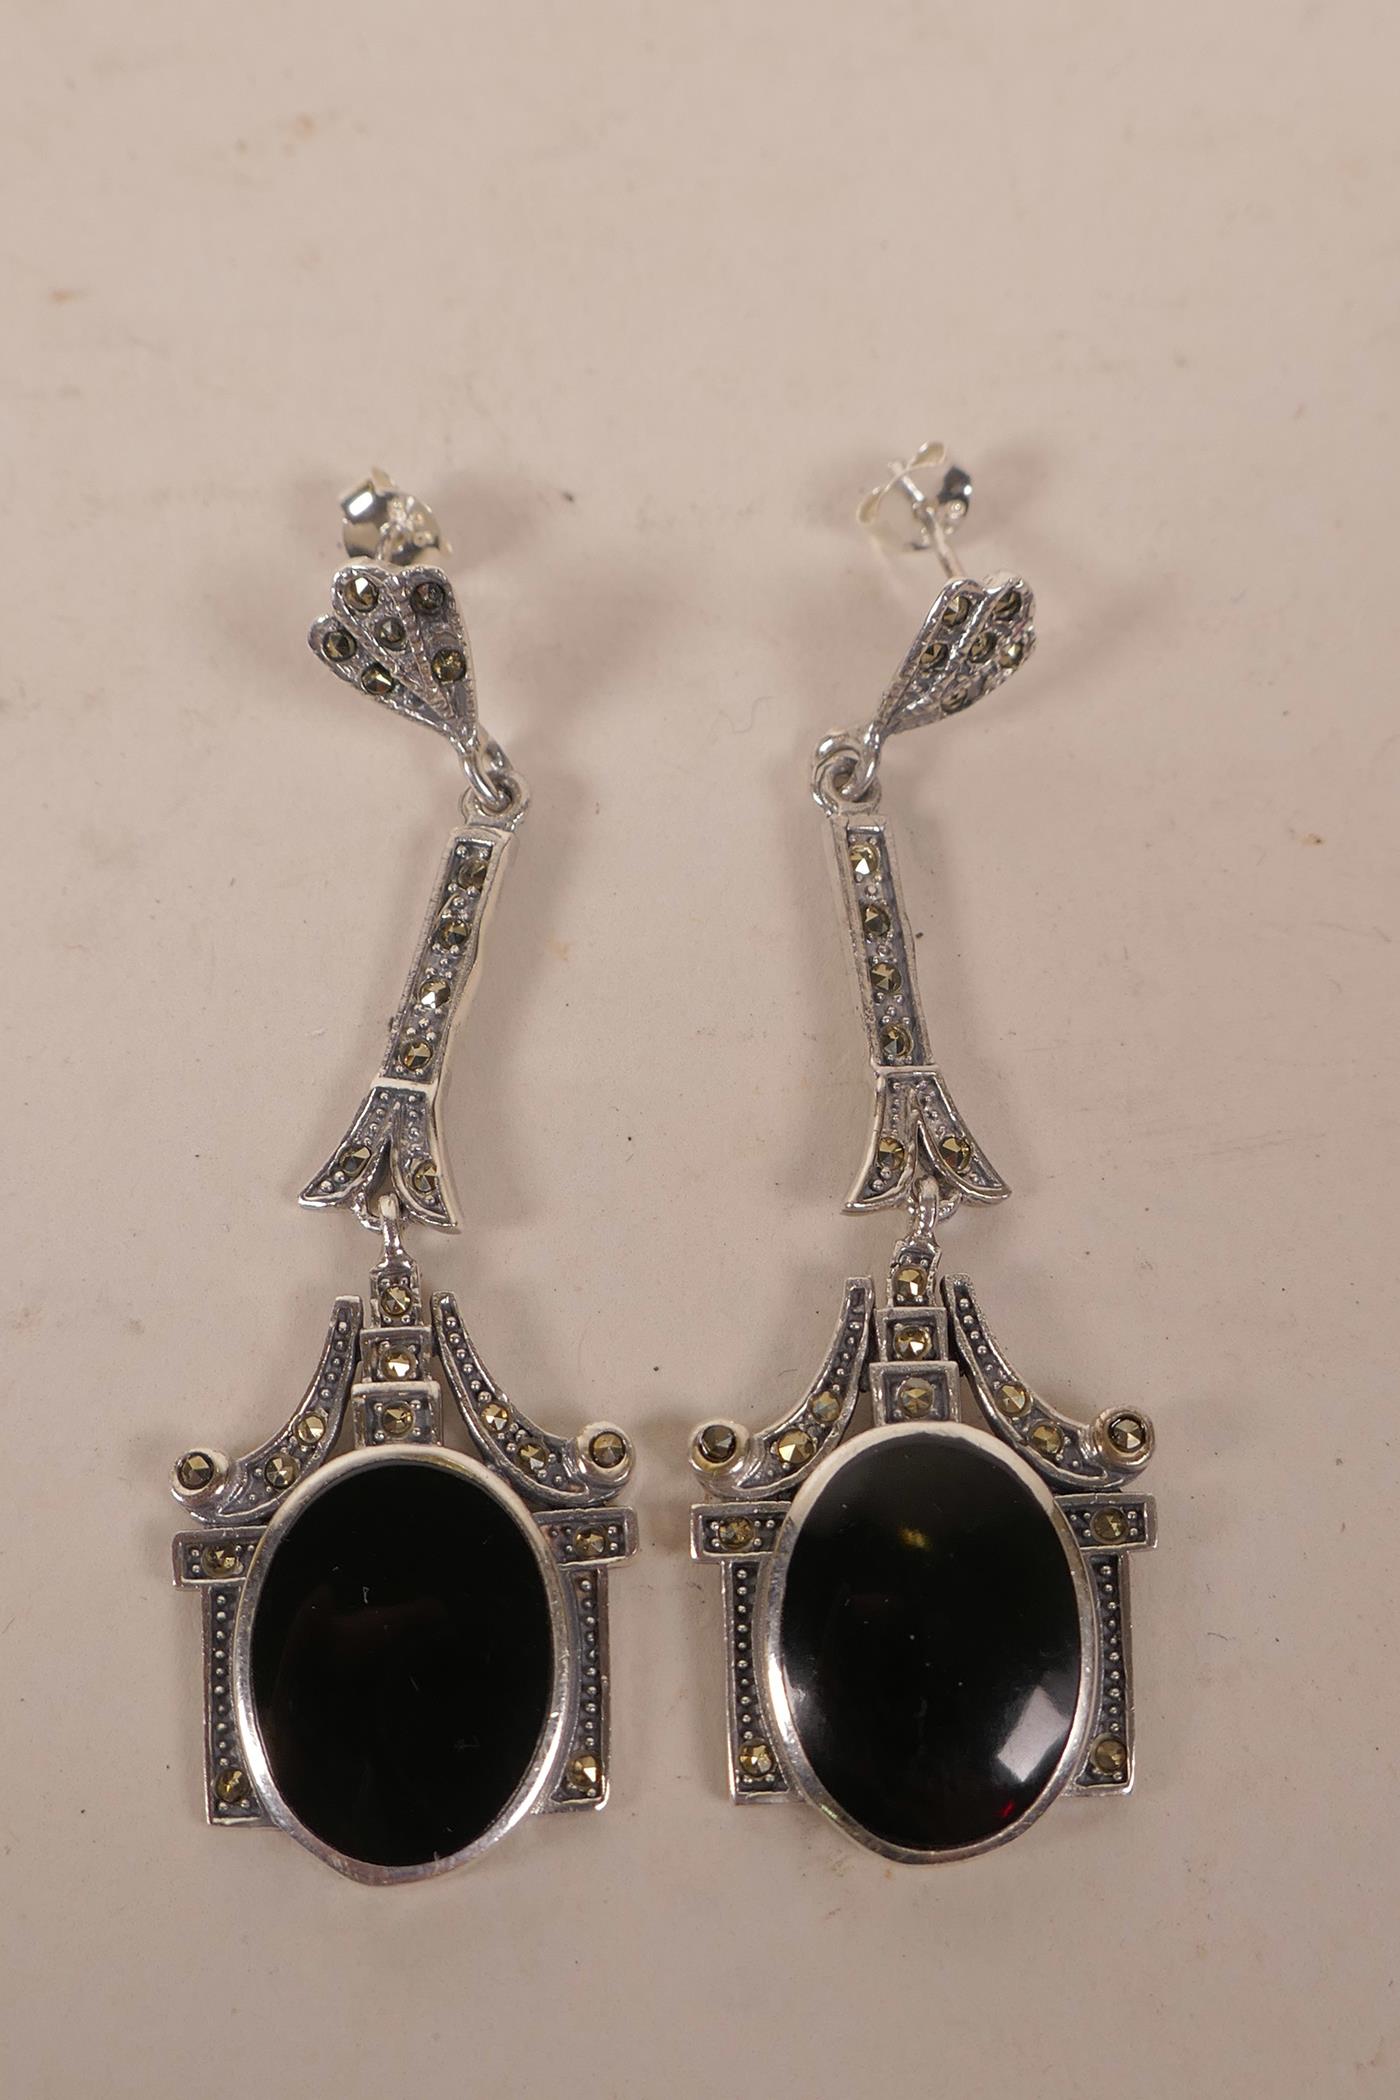 A pair of silver, enamel and marcasite set Art Deco style earrings, 2" long